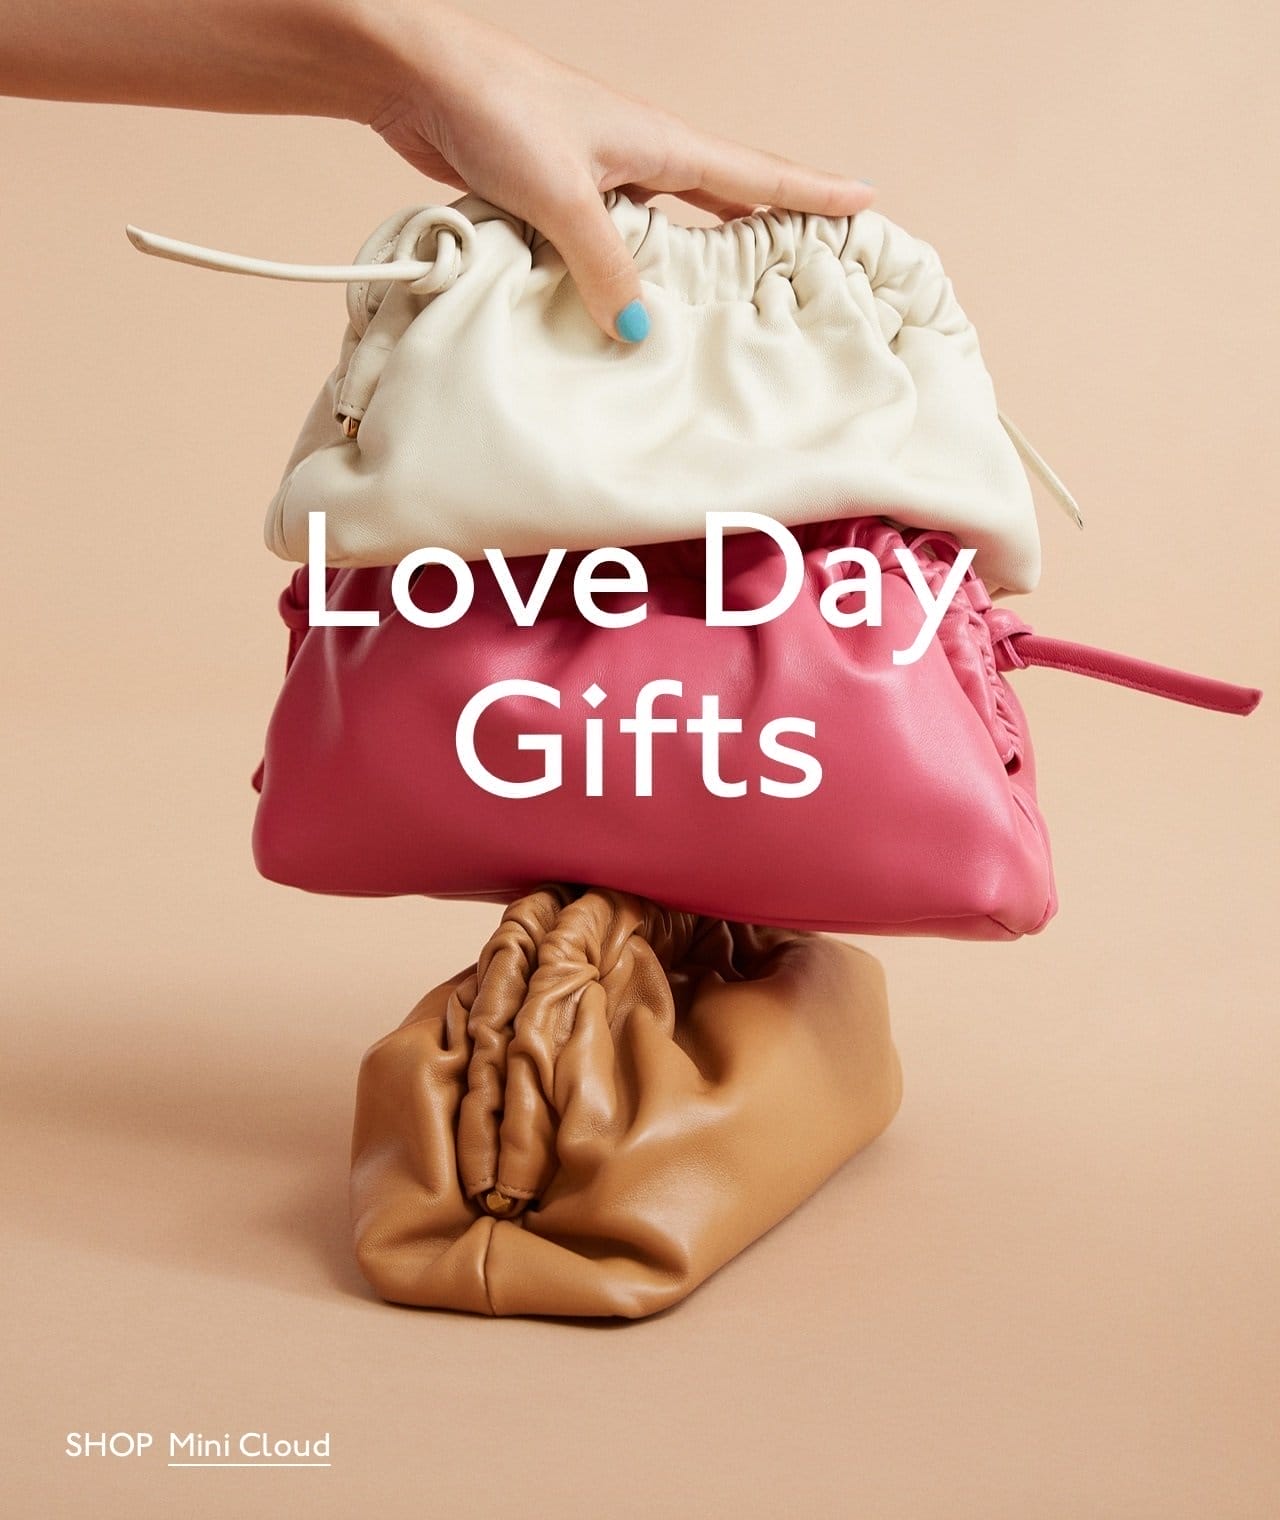 Love Day Gifts. Shop now to receive by 2/14.